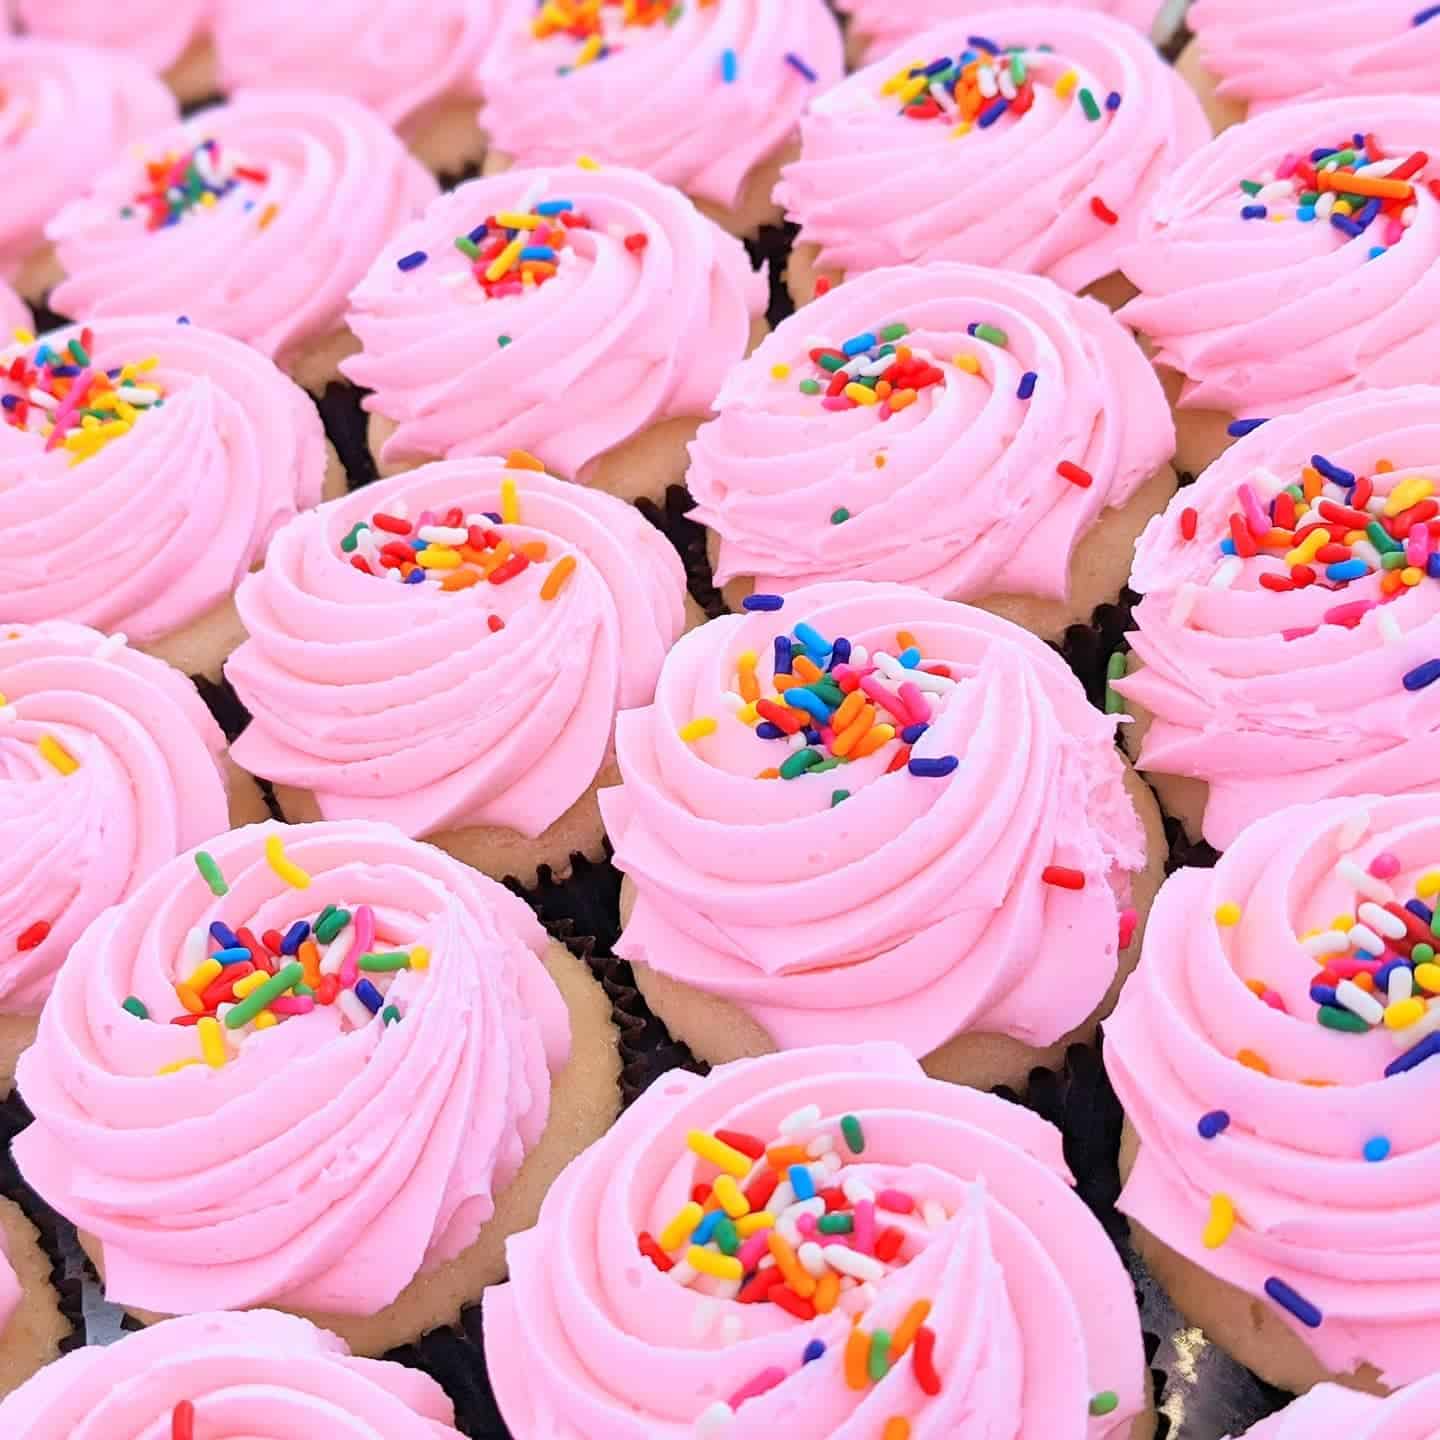 Pink frosted cupcakes with sprinkles on top from PinkaBella Bothell, WA